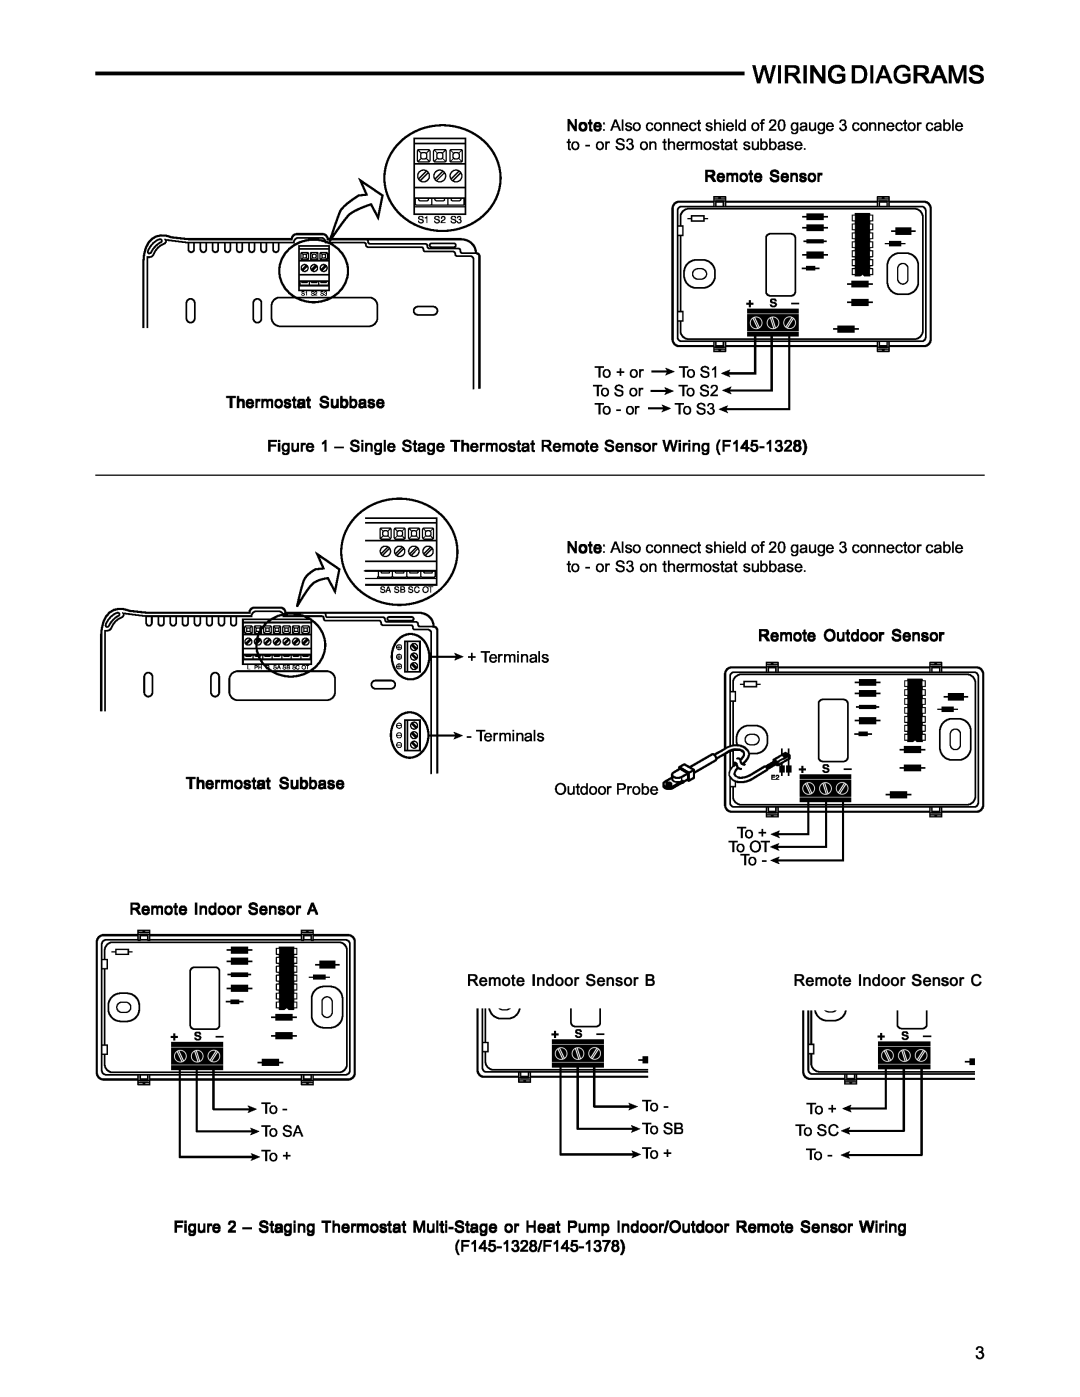 White Rodgers F145-1328, F145-1378 specifications Wiring Diagrams 